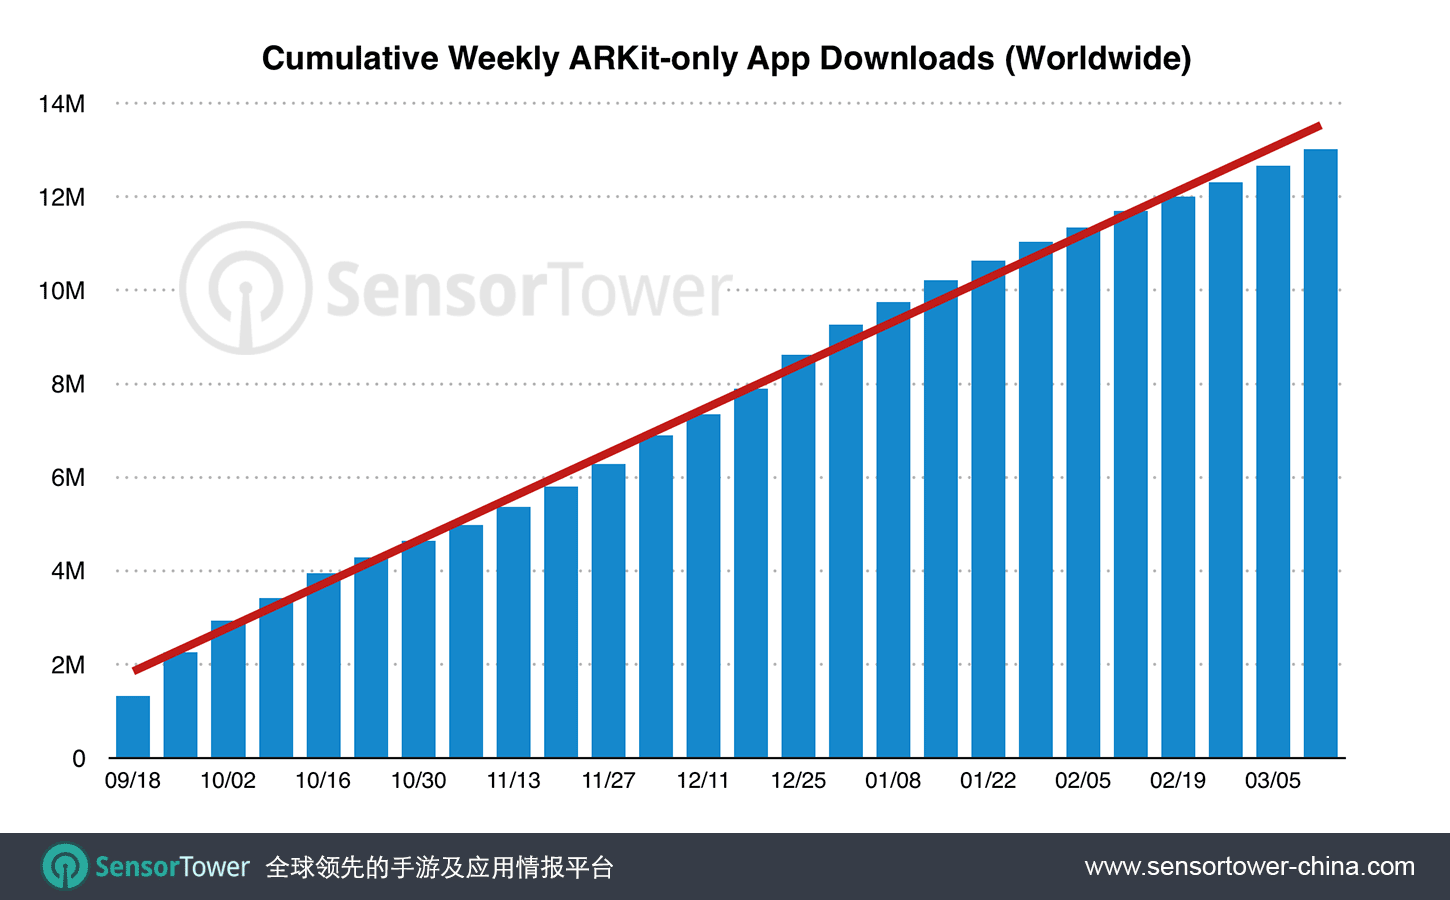 Chart showing downloads of ARKit-only apps worldwide since September 2017 CN